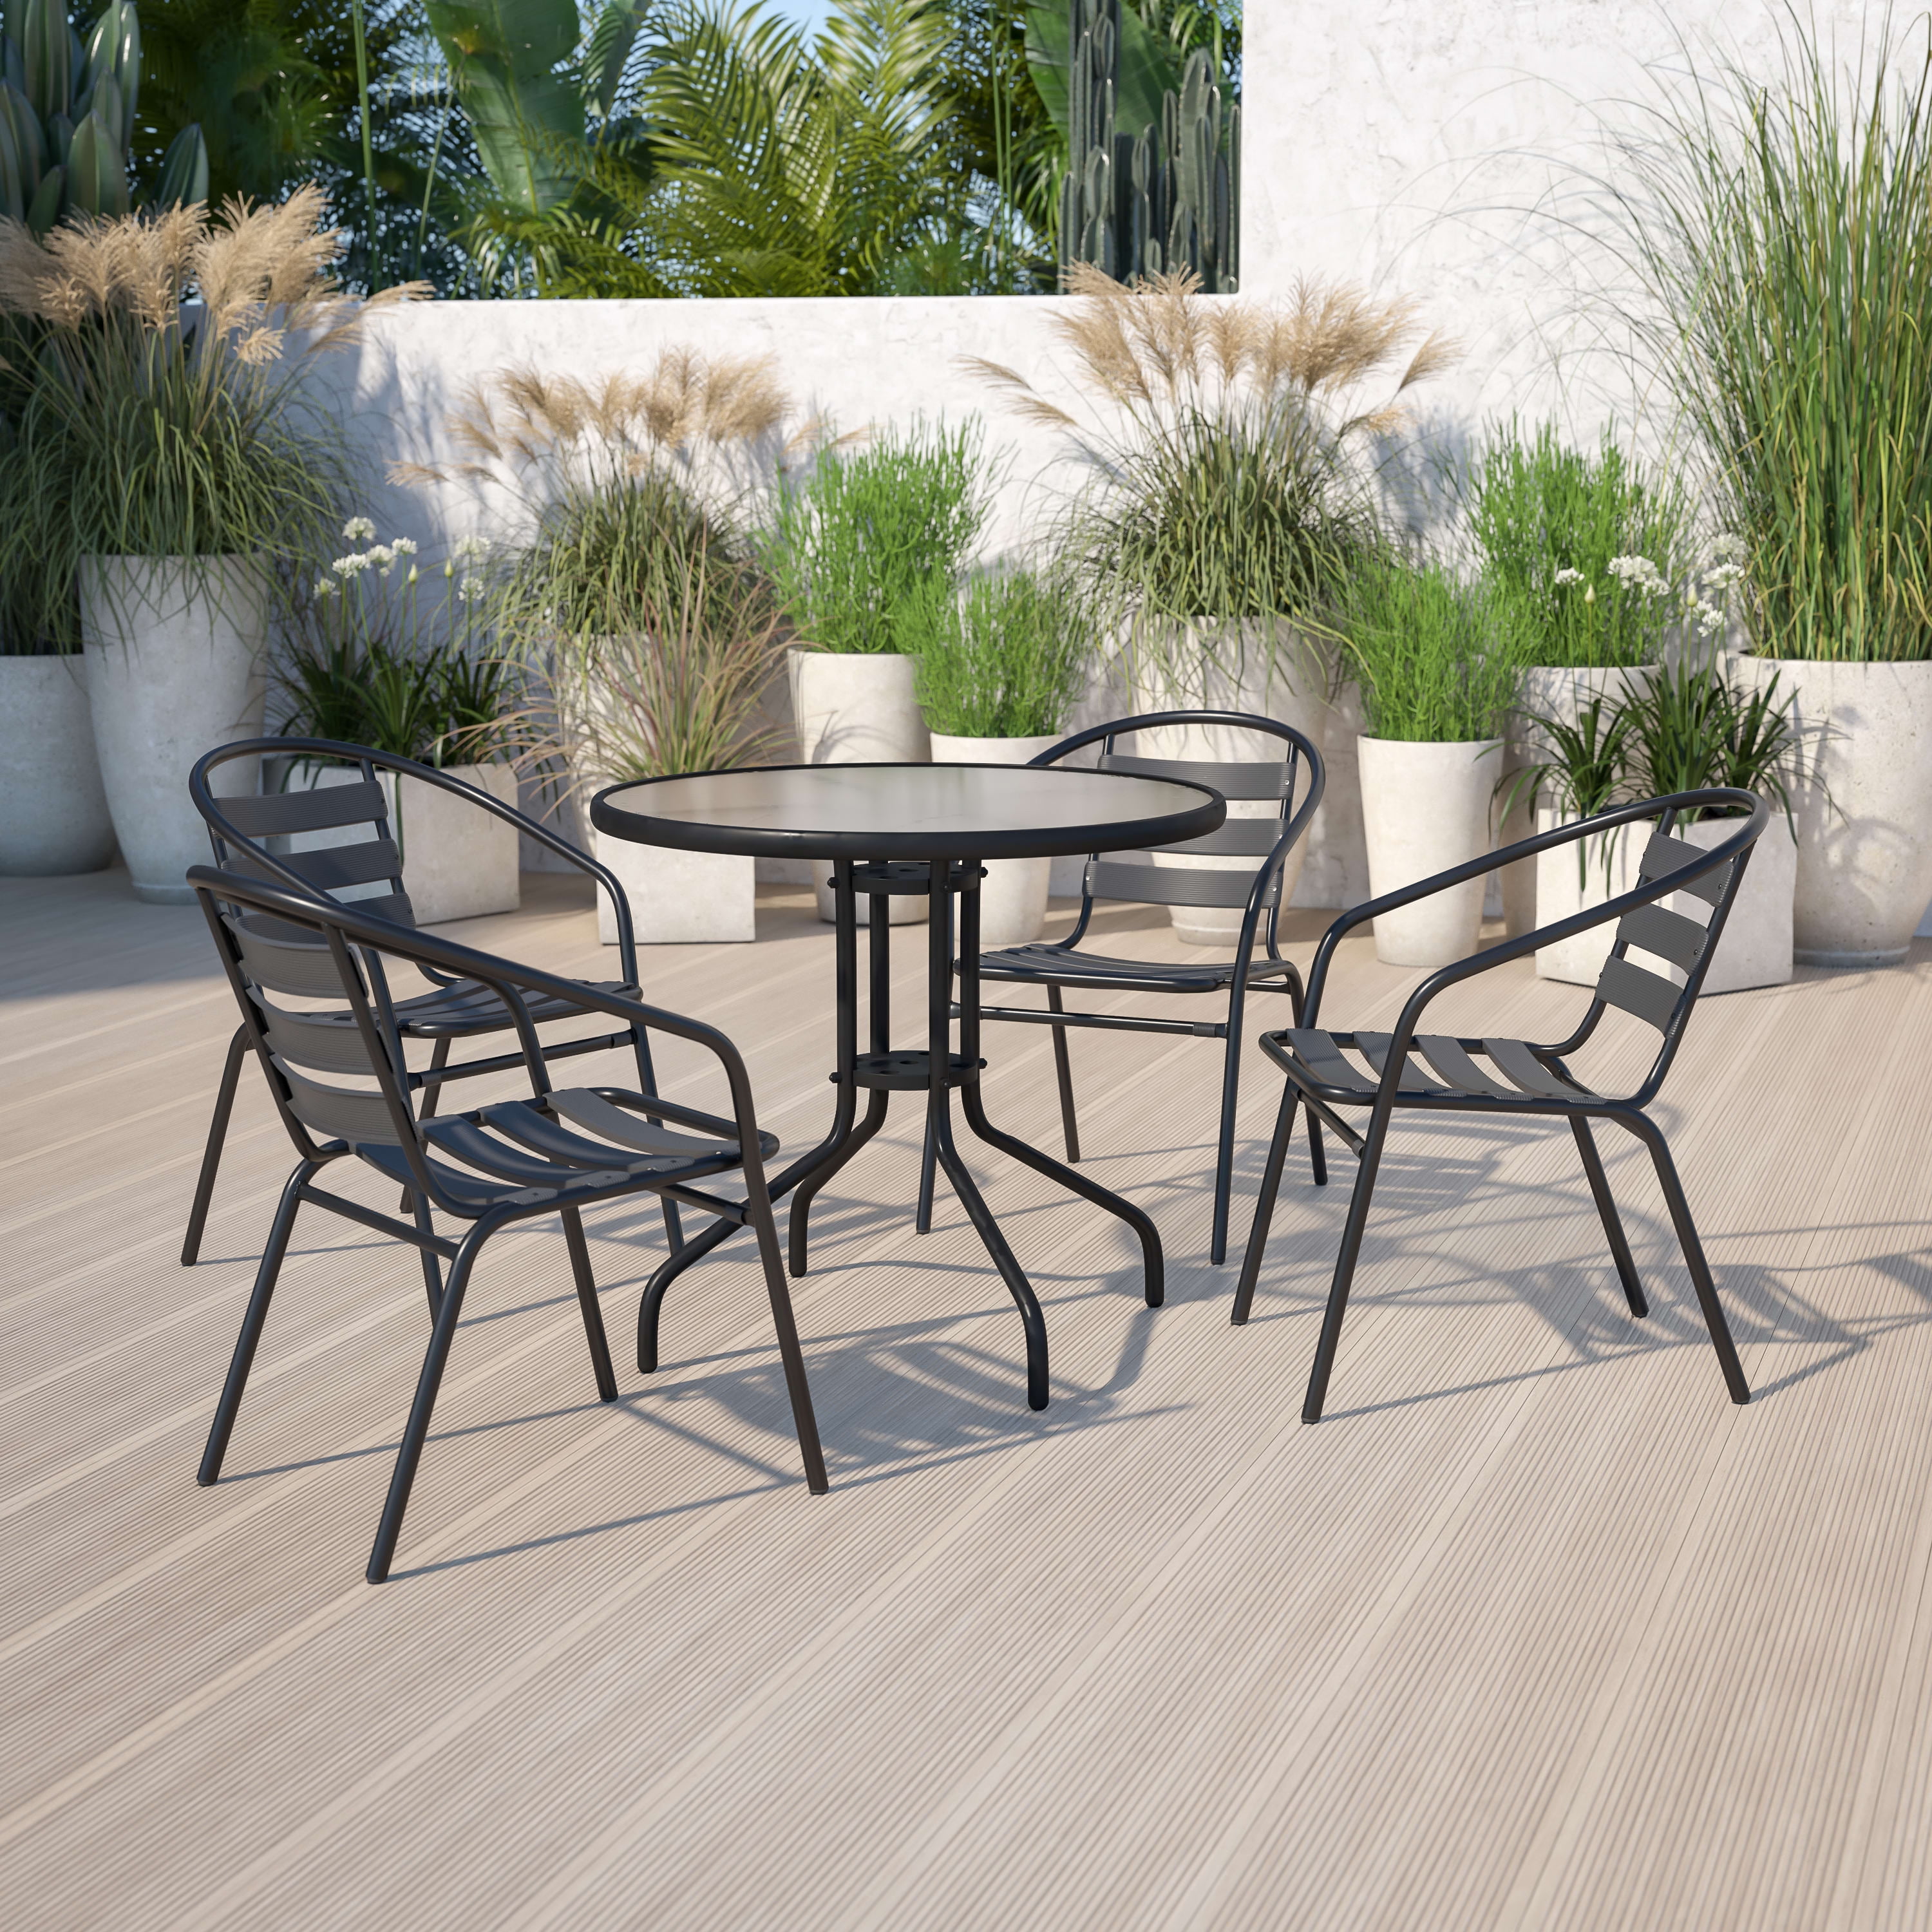 Details about   _NEW_Mainstays Albany Lane 6 Piece Outdoor Patio Dining Set 